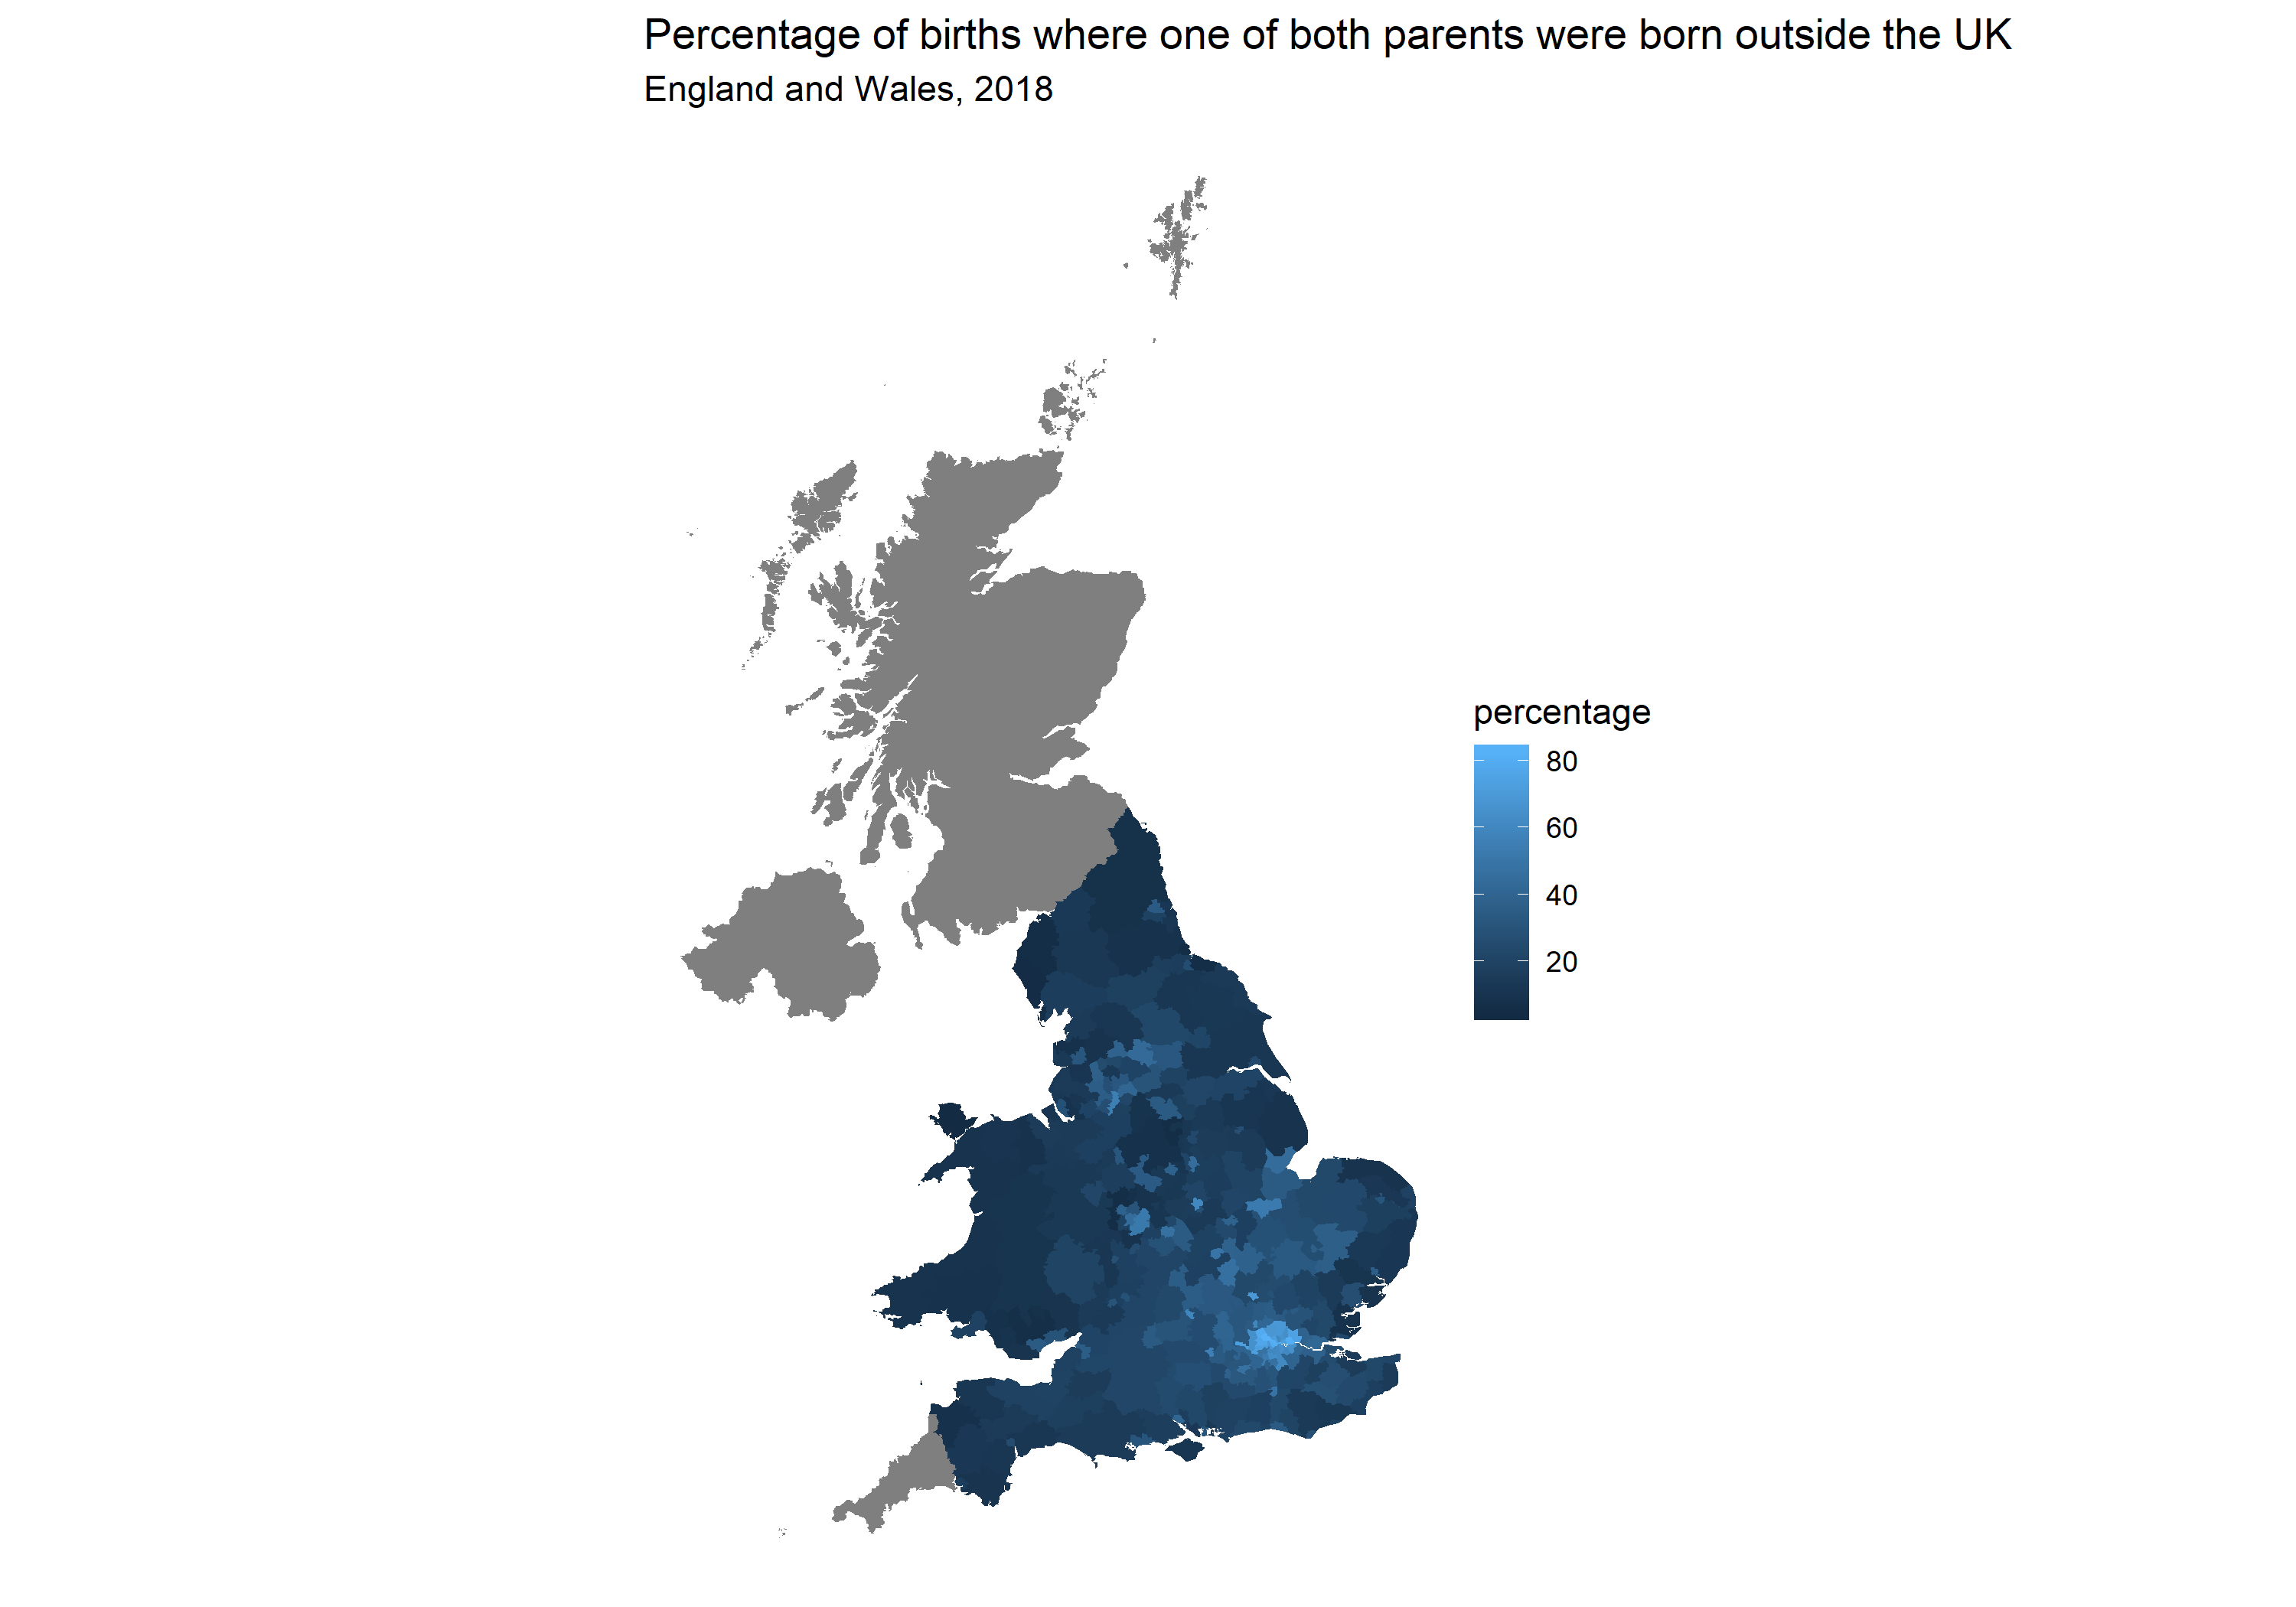 How To Make A Uk Local Authority Choropleth Map In R R For Journalists